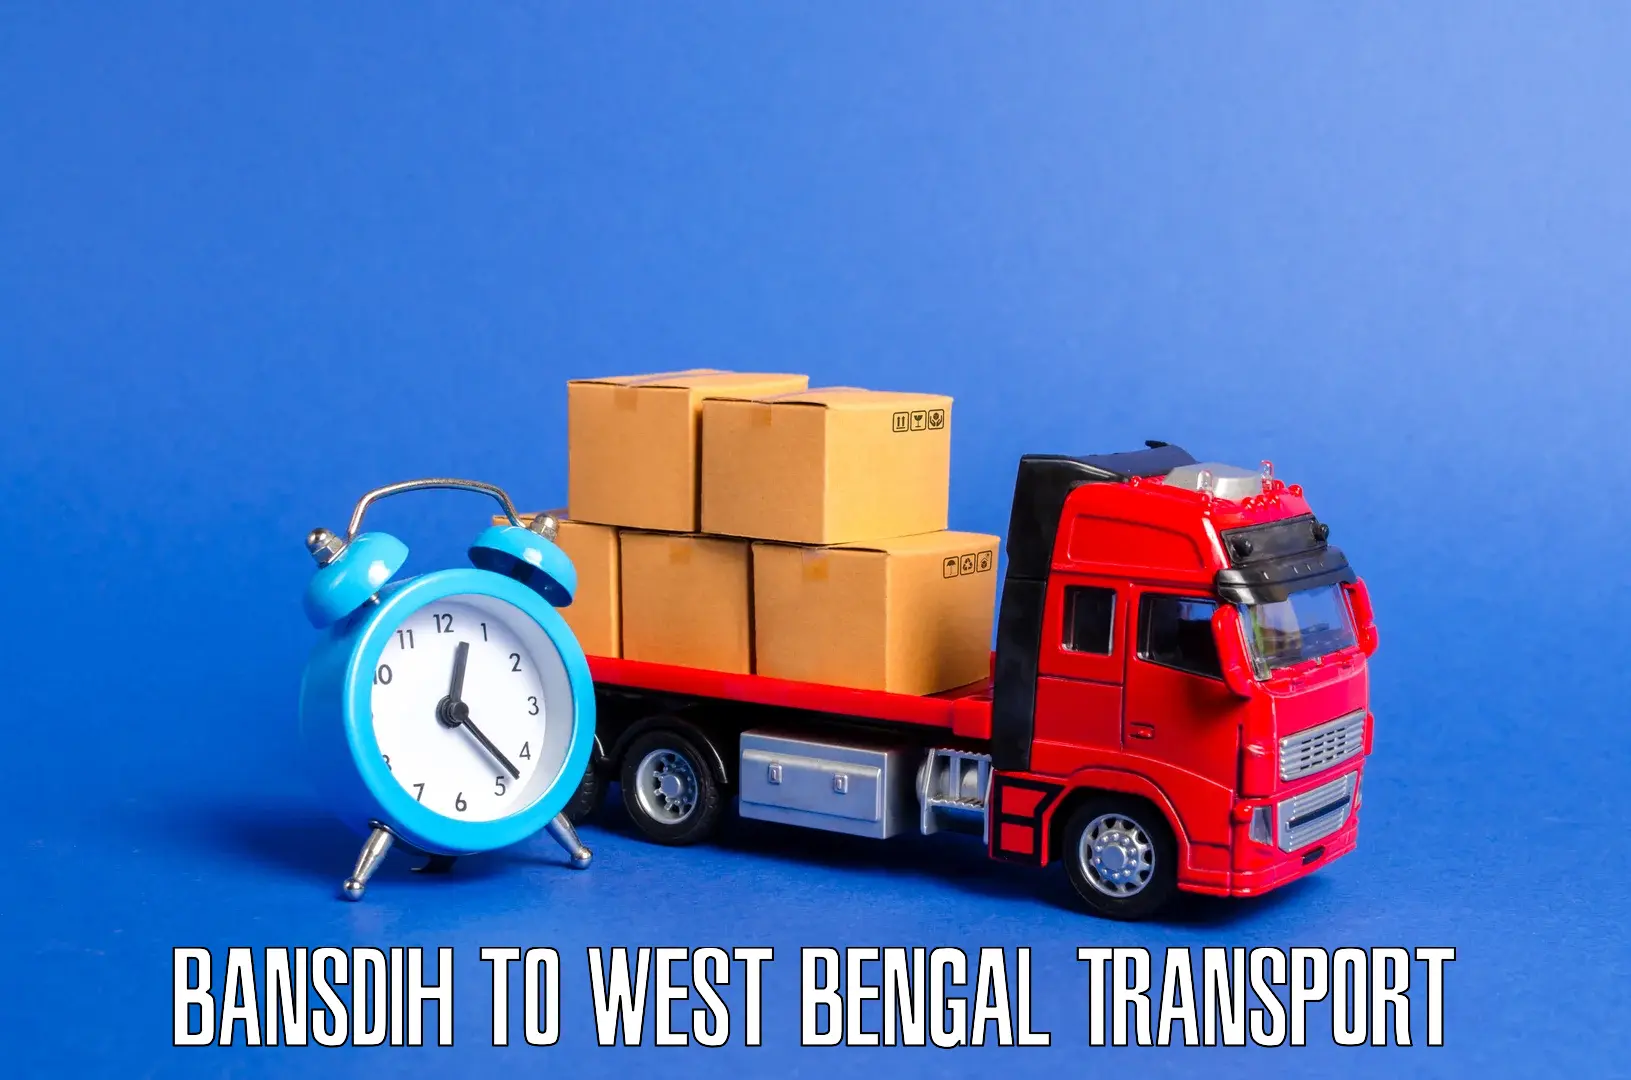 Truck transport companies in India Bansdih to Ennore